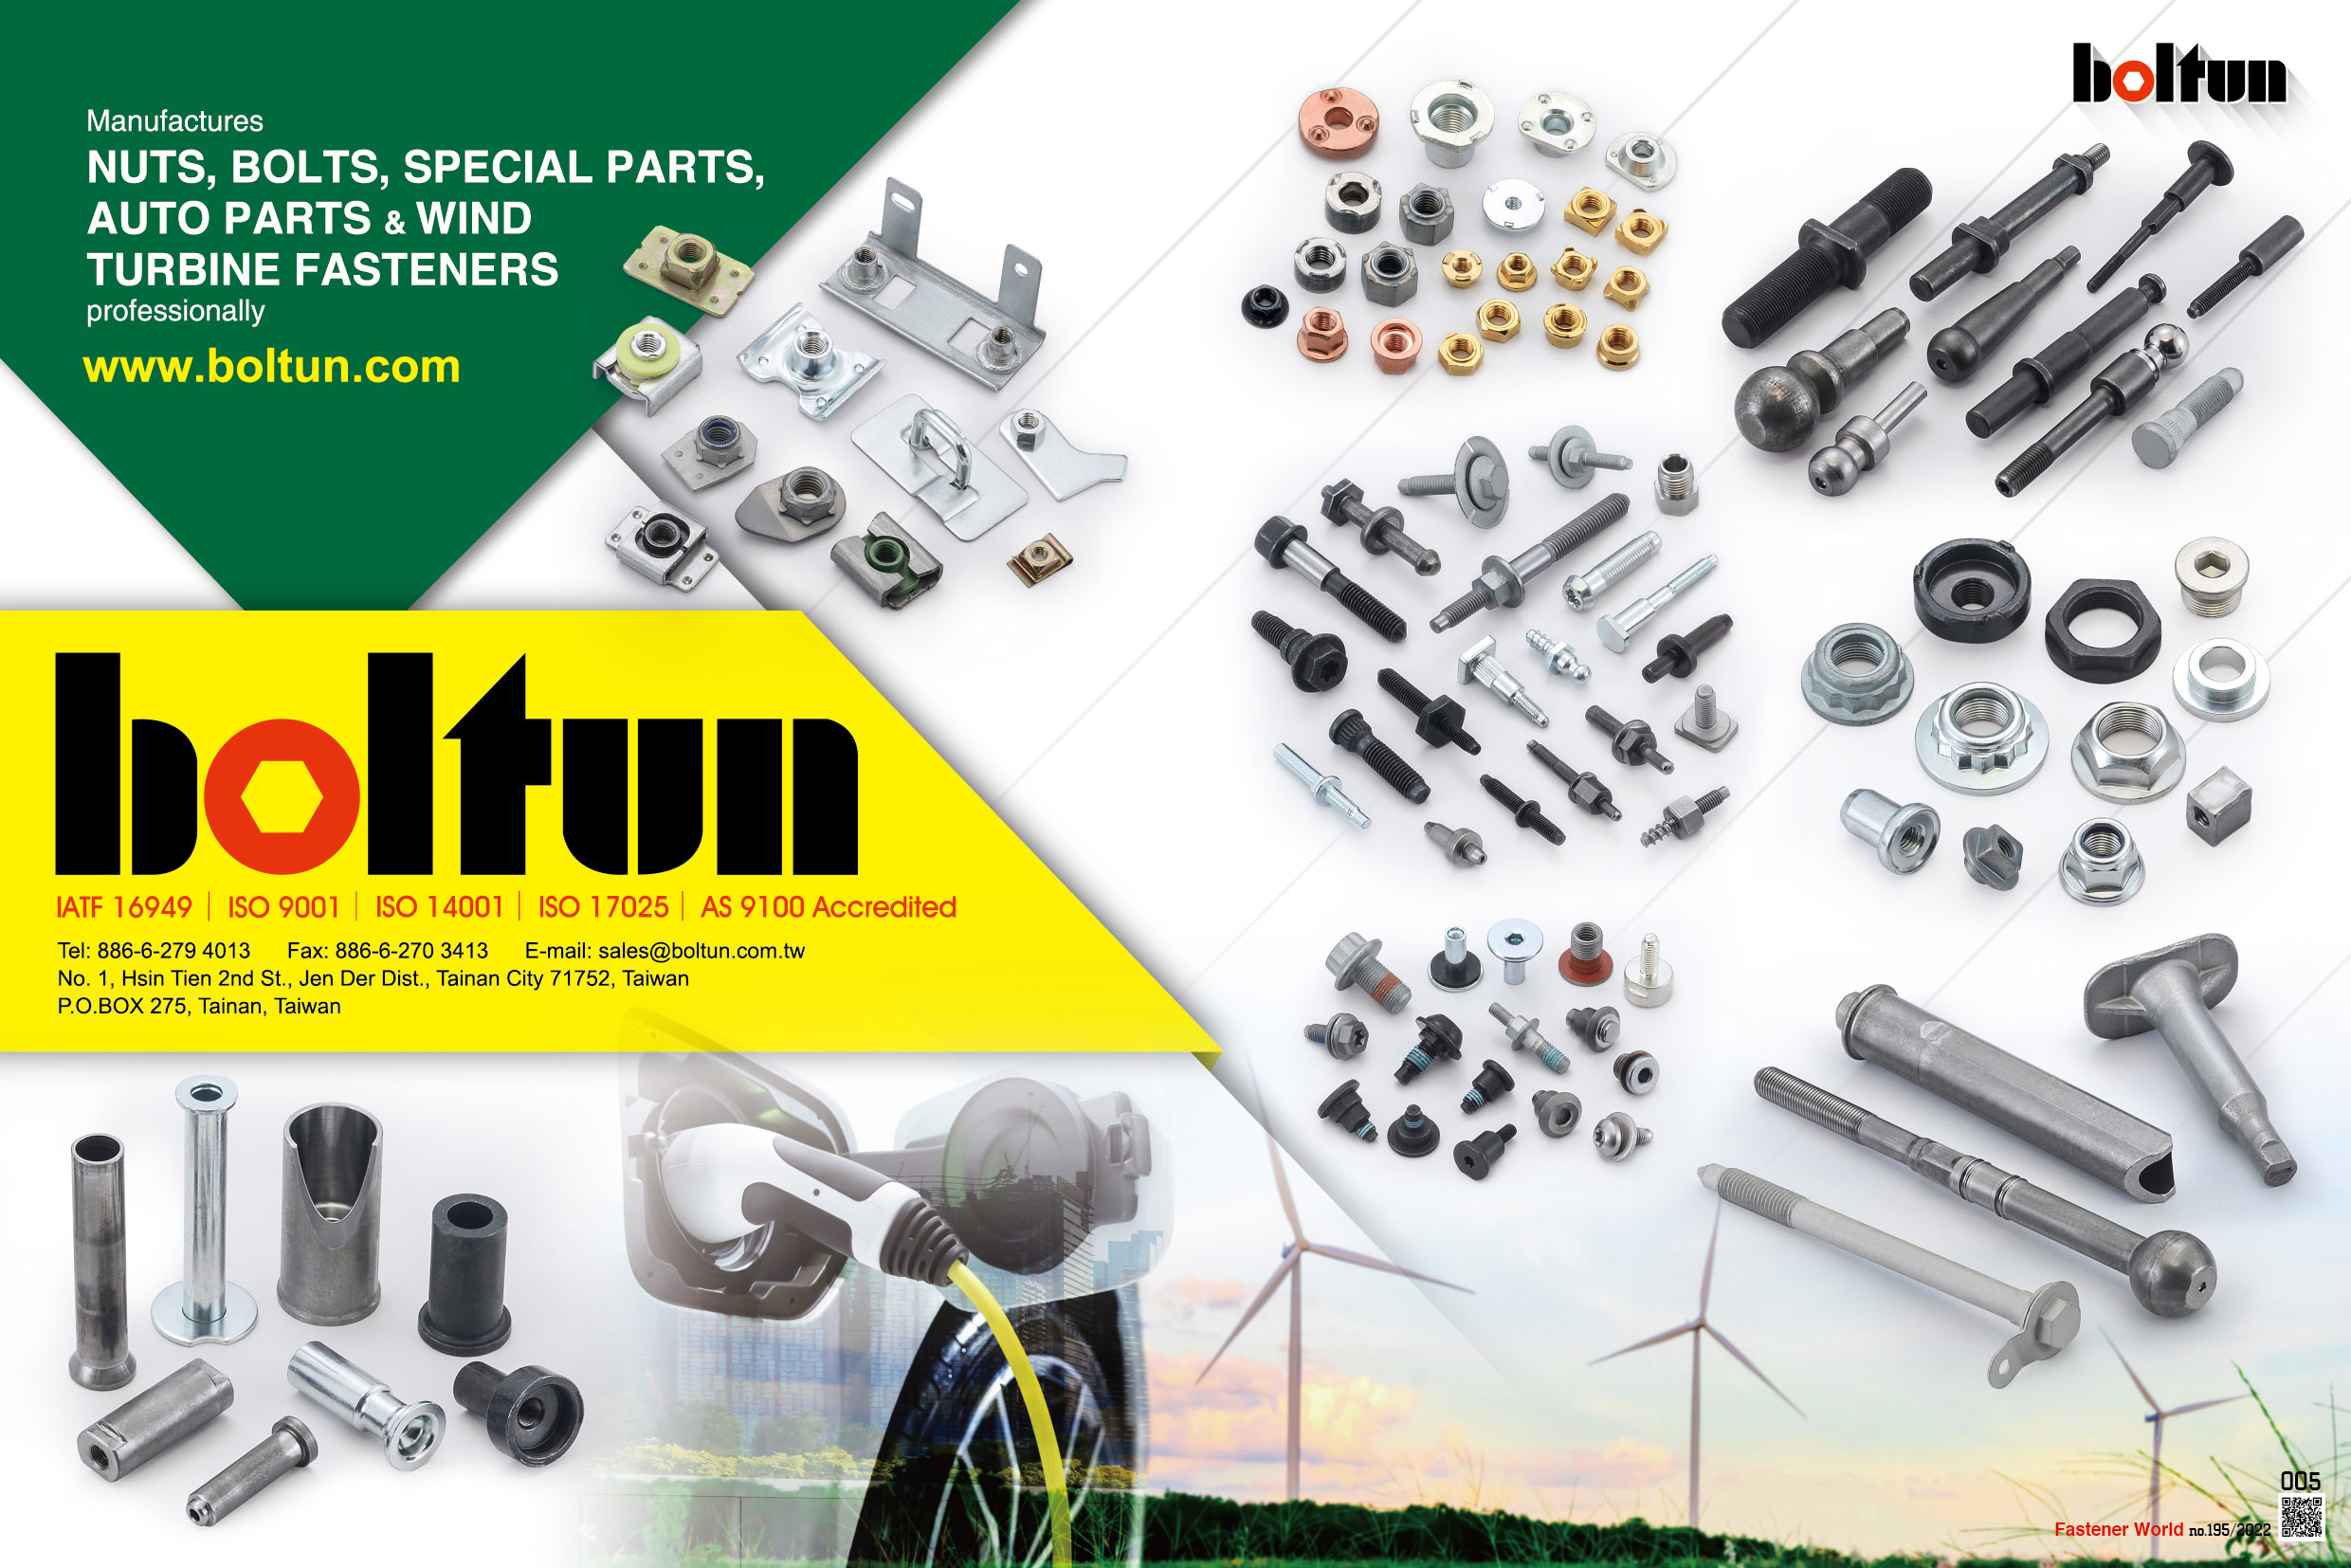 BOLTUN CORPORATION  , Welding Nuts,Rivet Nuts,Clinch Nuts,Locking Nuts,Nylon Insert Nuts,Conical Washer Nuts,T-Nuts,CNC Machining Parts,Stamping Parts,Bushed & Sleeves,Assembly Components,Special Parts,HEX. Bolt & Screw,Flange Bolt,Socket,Sems,Screw With Welding Projection,Screw With Welding Ring & Points,Clinch Bolt,T C Bolt,Special Pin,Wheel Bolt,Rail Bolt,Rail Bolts Construction Fasteners: Nuts, Screws & Washers,Wind Turbine Fasteners Kits: Nuts, Bolts & Washers Truck Wheel Bolts,Bolts & Nuts & Components,Motorcycle parts,Nylon rings & special washer,Expansion Bolt , All Kinds Of Nuts